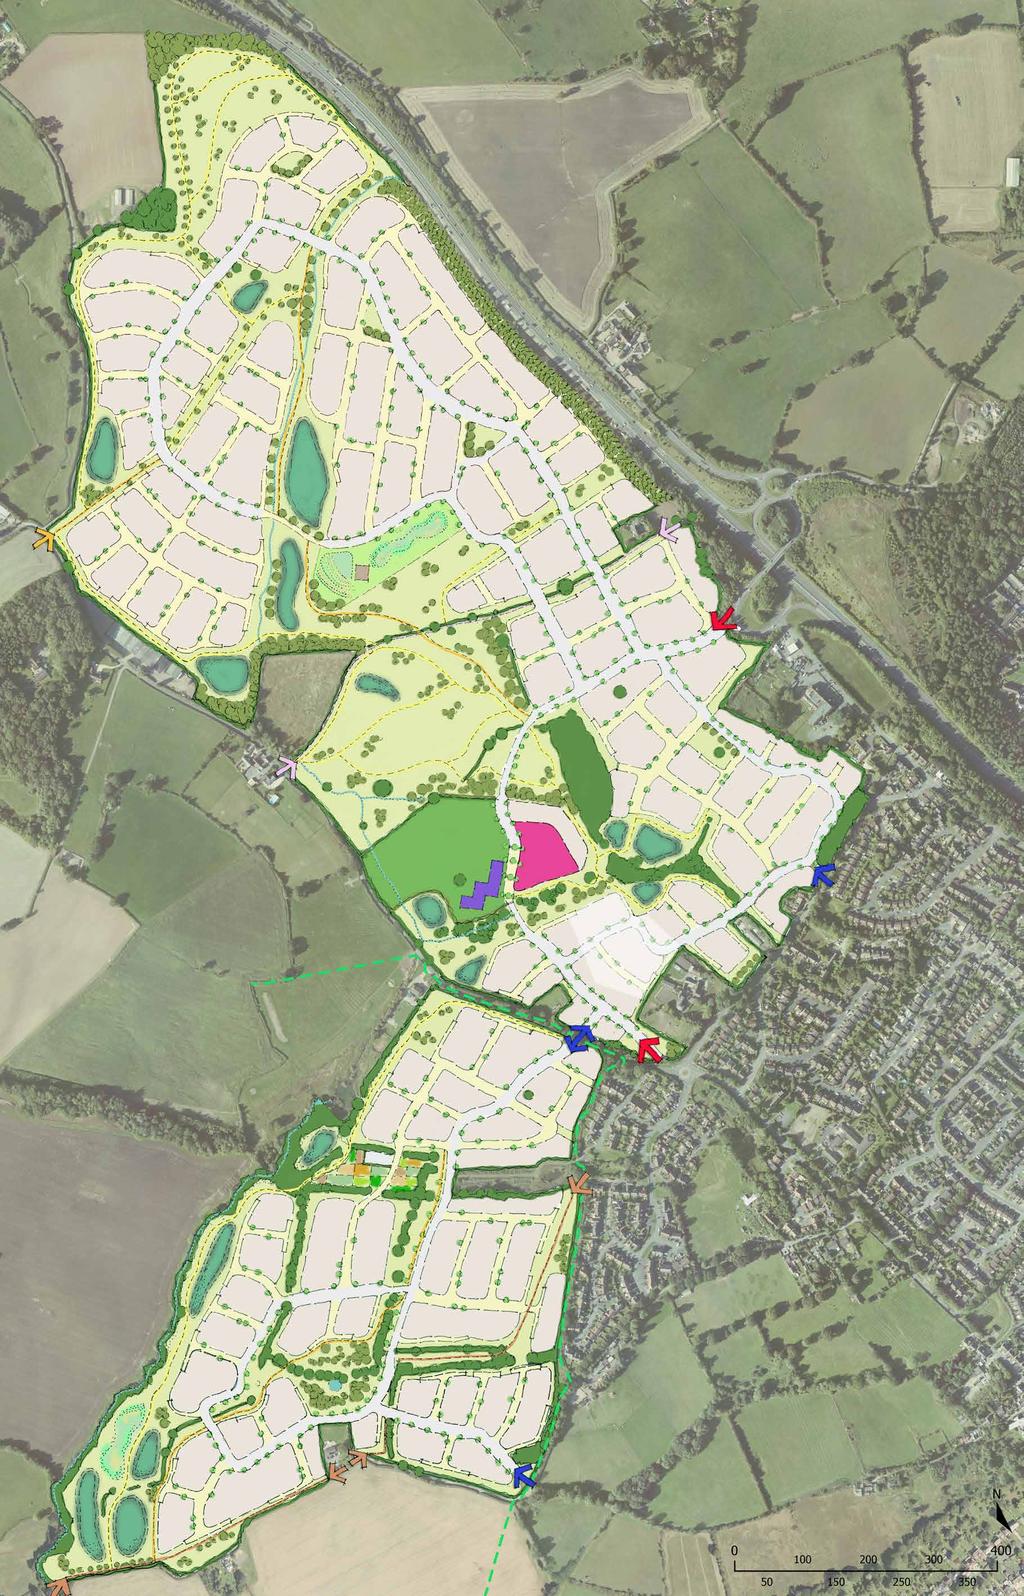 DRAFT MASTERPLAN The draft illustrative masterplan shows how the site can be developed to create a high quality new scheme that responds to the existing context of the site. Up to,800 new dwellings.